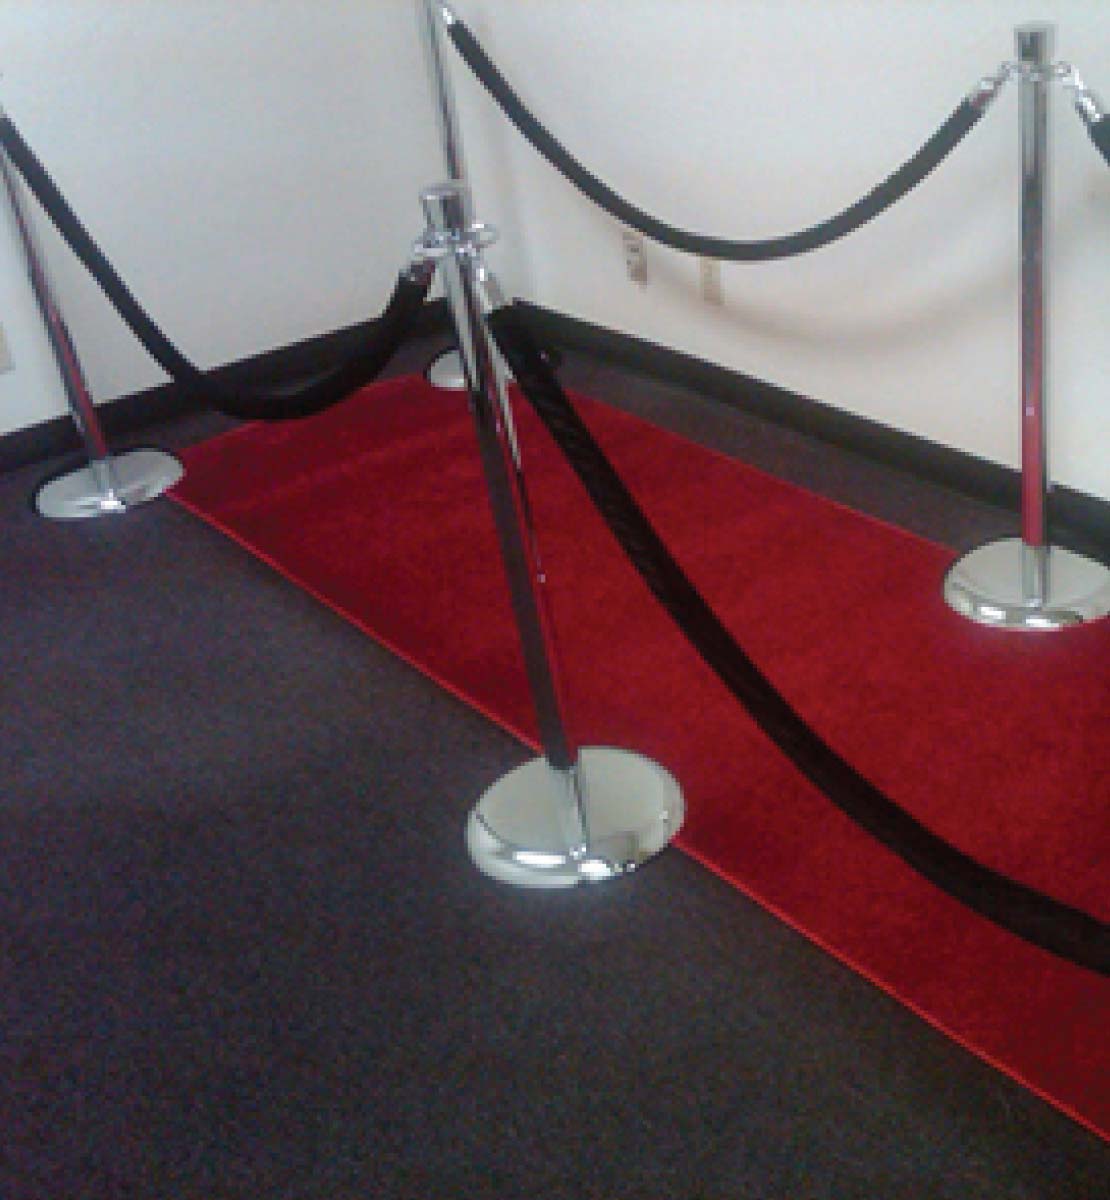 Velour Roping-Party Rental, Stanchion Rope and Chain